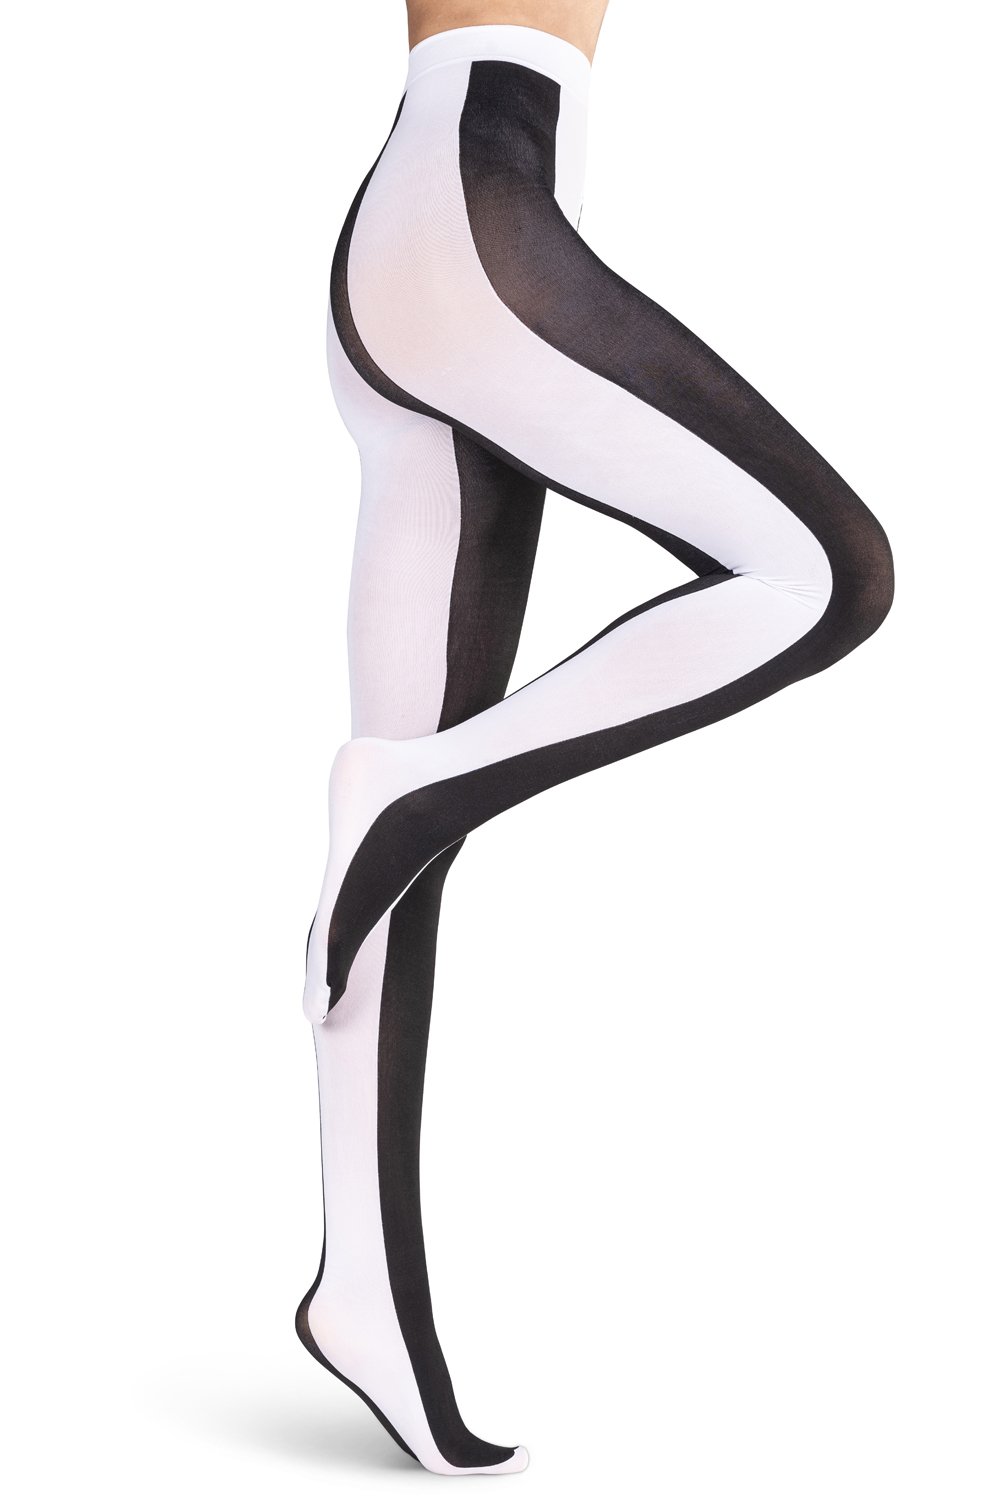 Two Toned Large Vertical Stripes Tights, Timeless Styles, Women